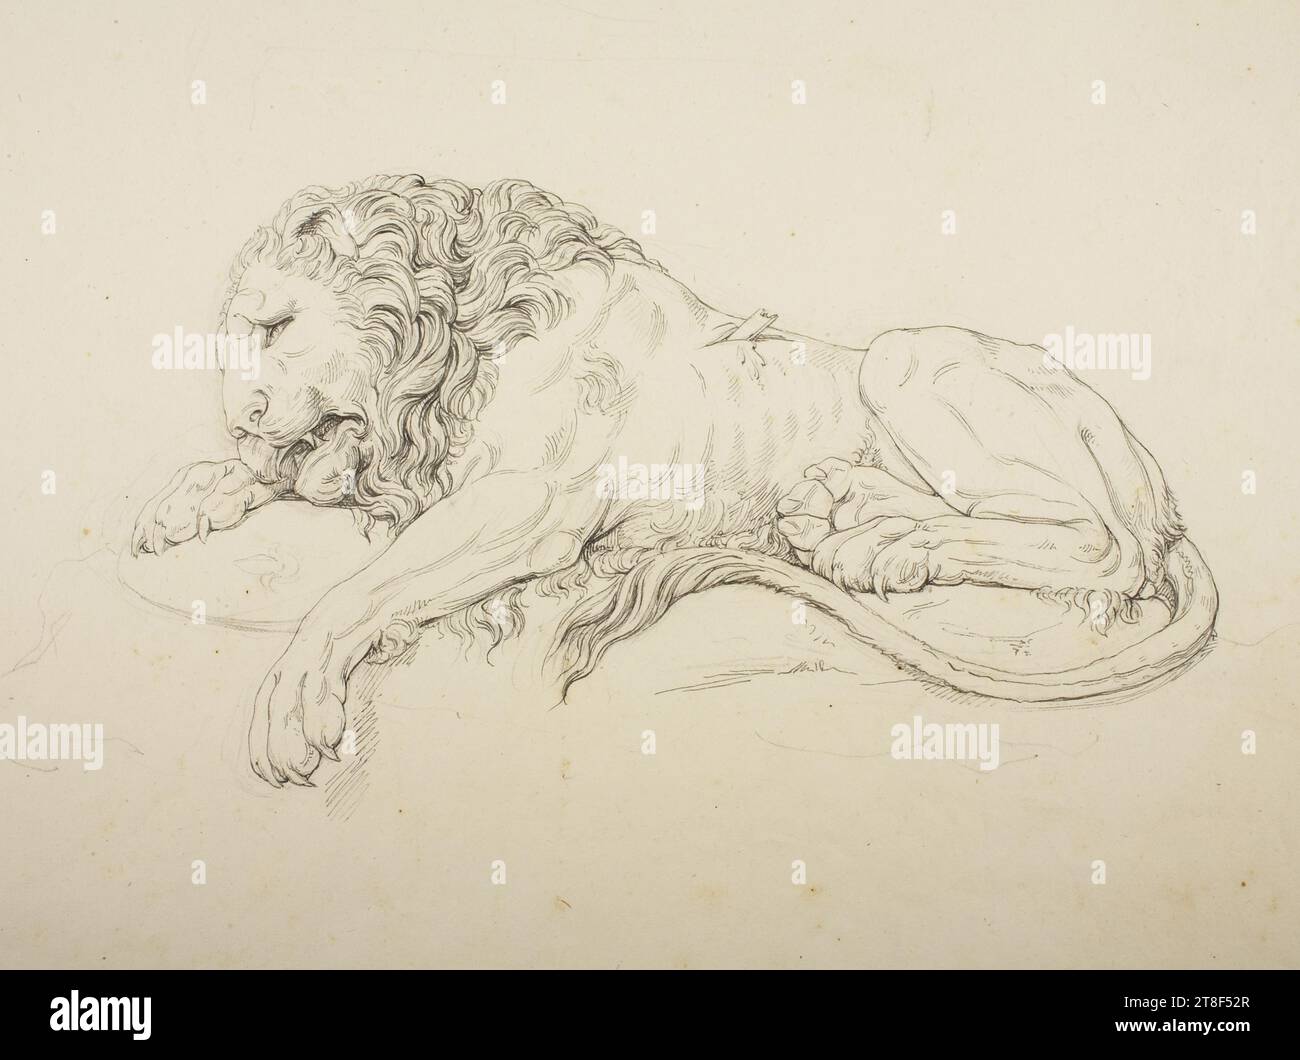 Dying Lion (The Lucerne Lion), Drawing, Paper, Color, Graphite, Drawn, Height 350 mm, Width 490 mm, Draftsmanship, Drawing, European Stock Photo